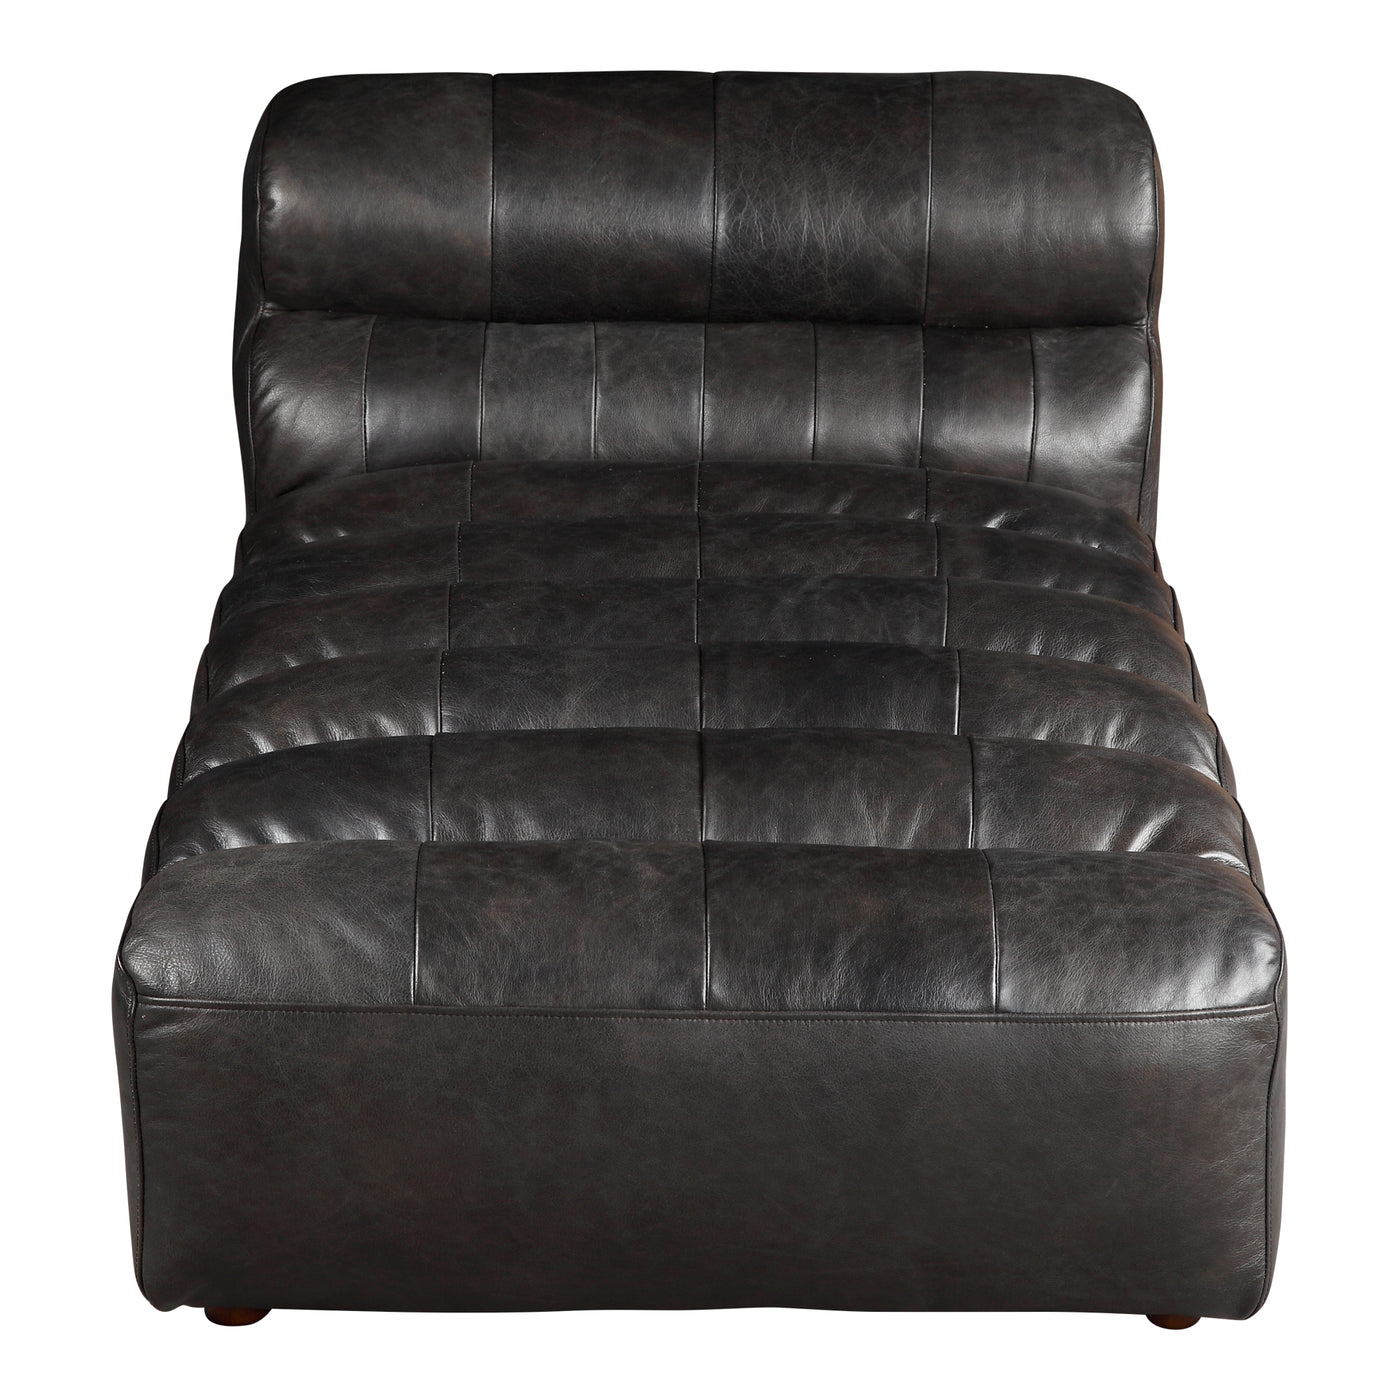 A chaise even Freud would be proud of. Outfit your space with comfort and quality with the Ramsay leather chaise. Ribbed t...